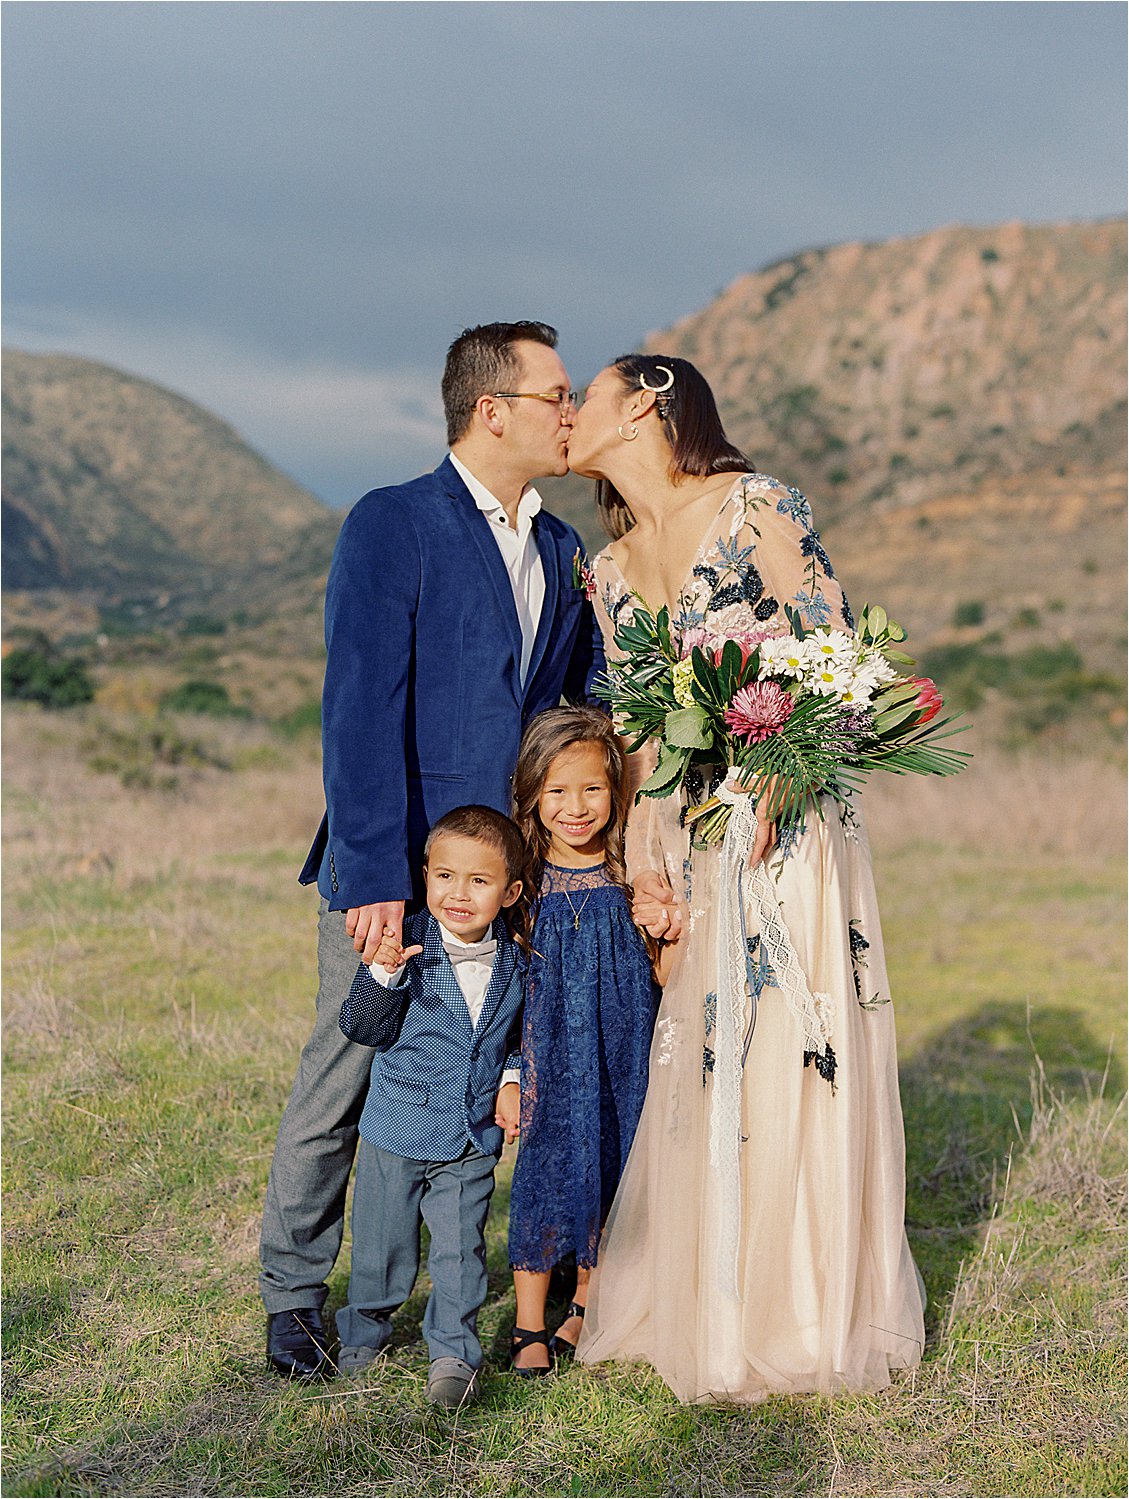 San Diego Vow Renewal at Mission Trails with San Diego and Florida Destination Film Wedding Photographer, Renee Hollingshead, PreVue Formal and Bridal, Jovani Fashions, and a DIY Bridal Bouquet.